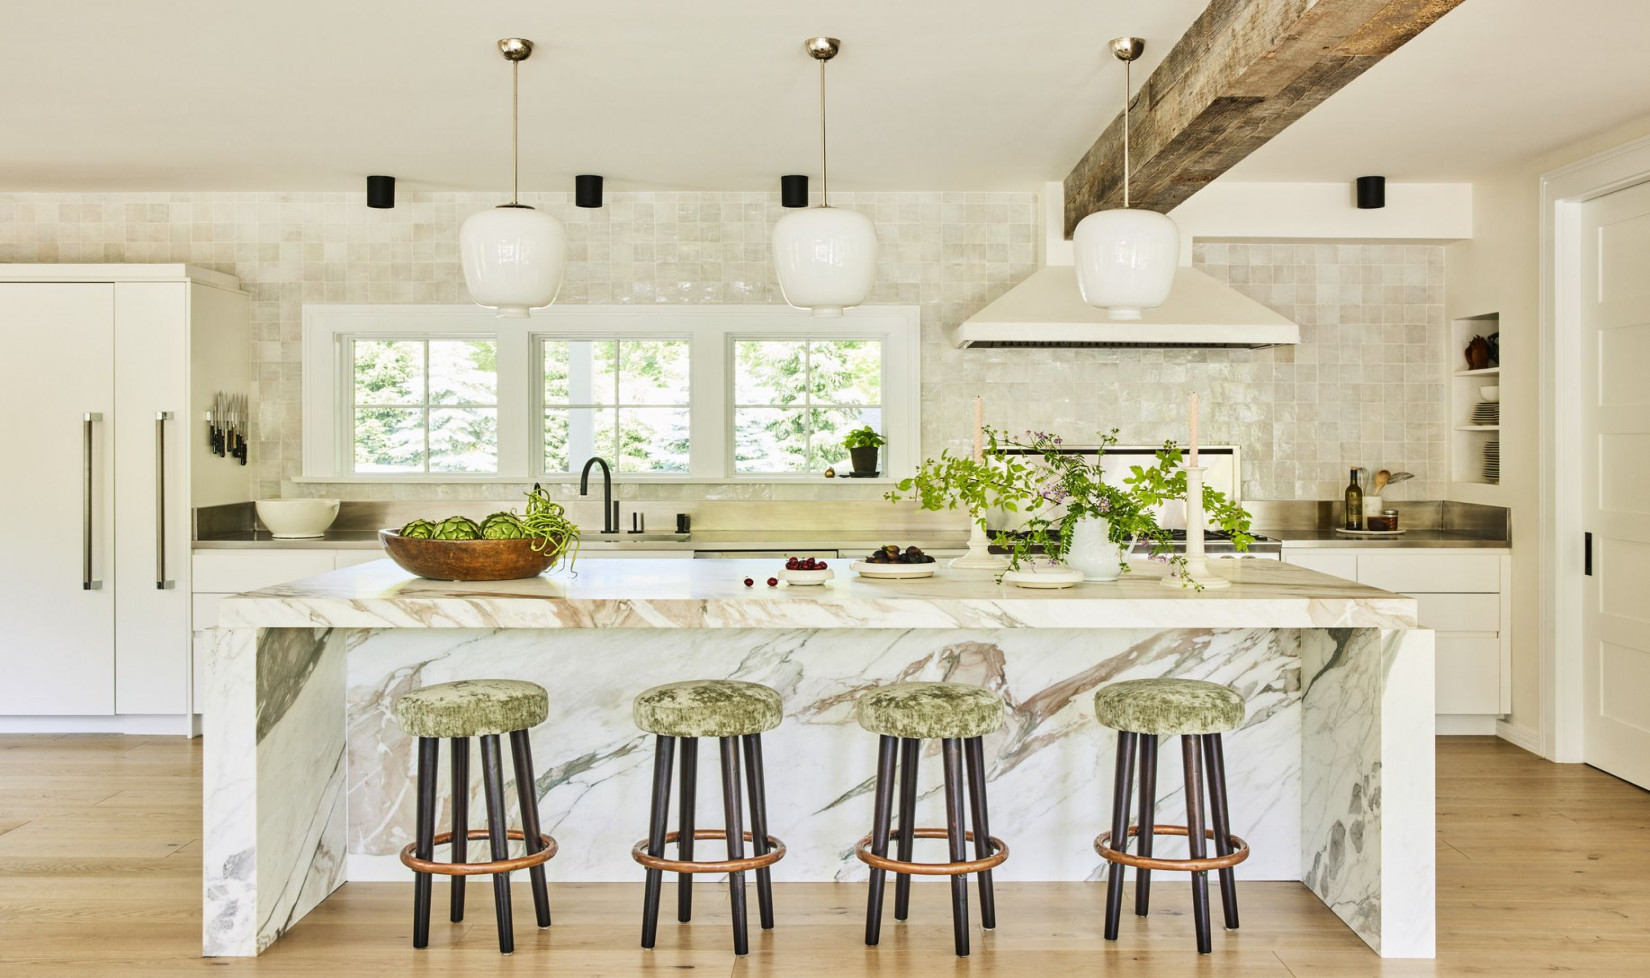 Design Ideas for the Ultimate Entertaining Kitchen